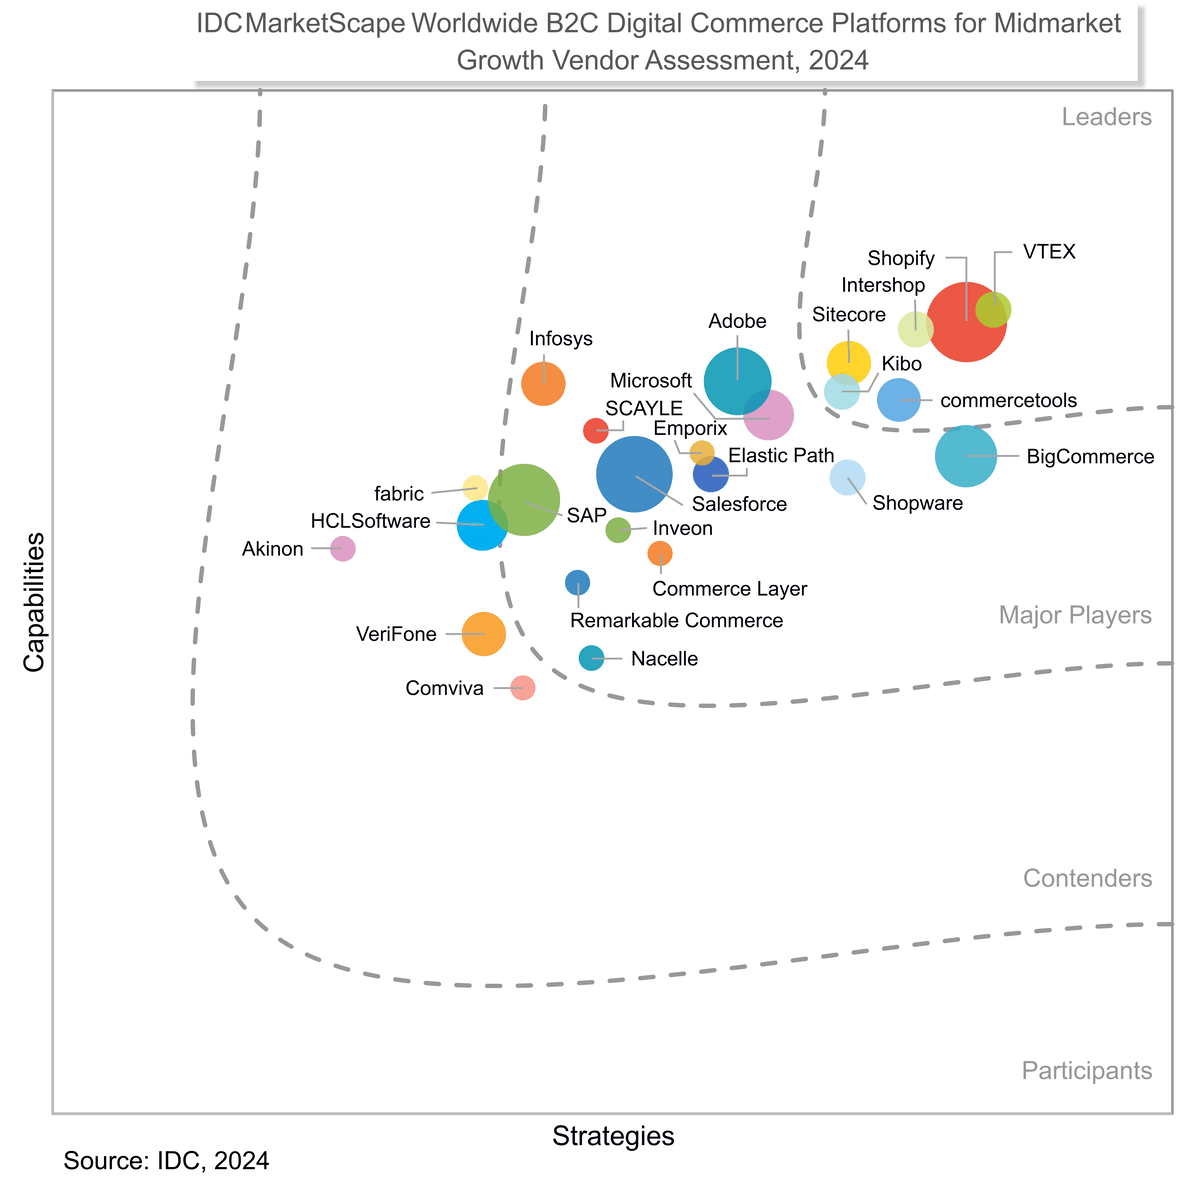 Graph charting Shopify’s position as a Leader in the 2024 IDC MarketScape: Worldwide B2C Digital Commerce Platforms for Midmarket Growth